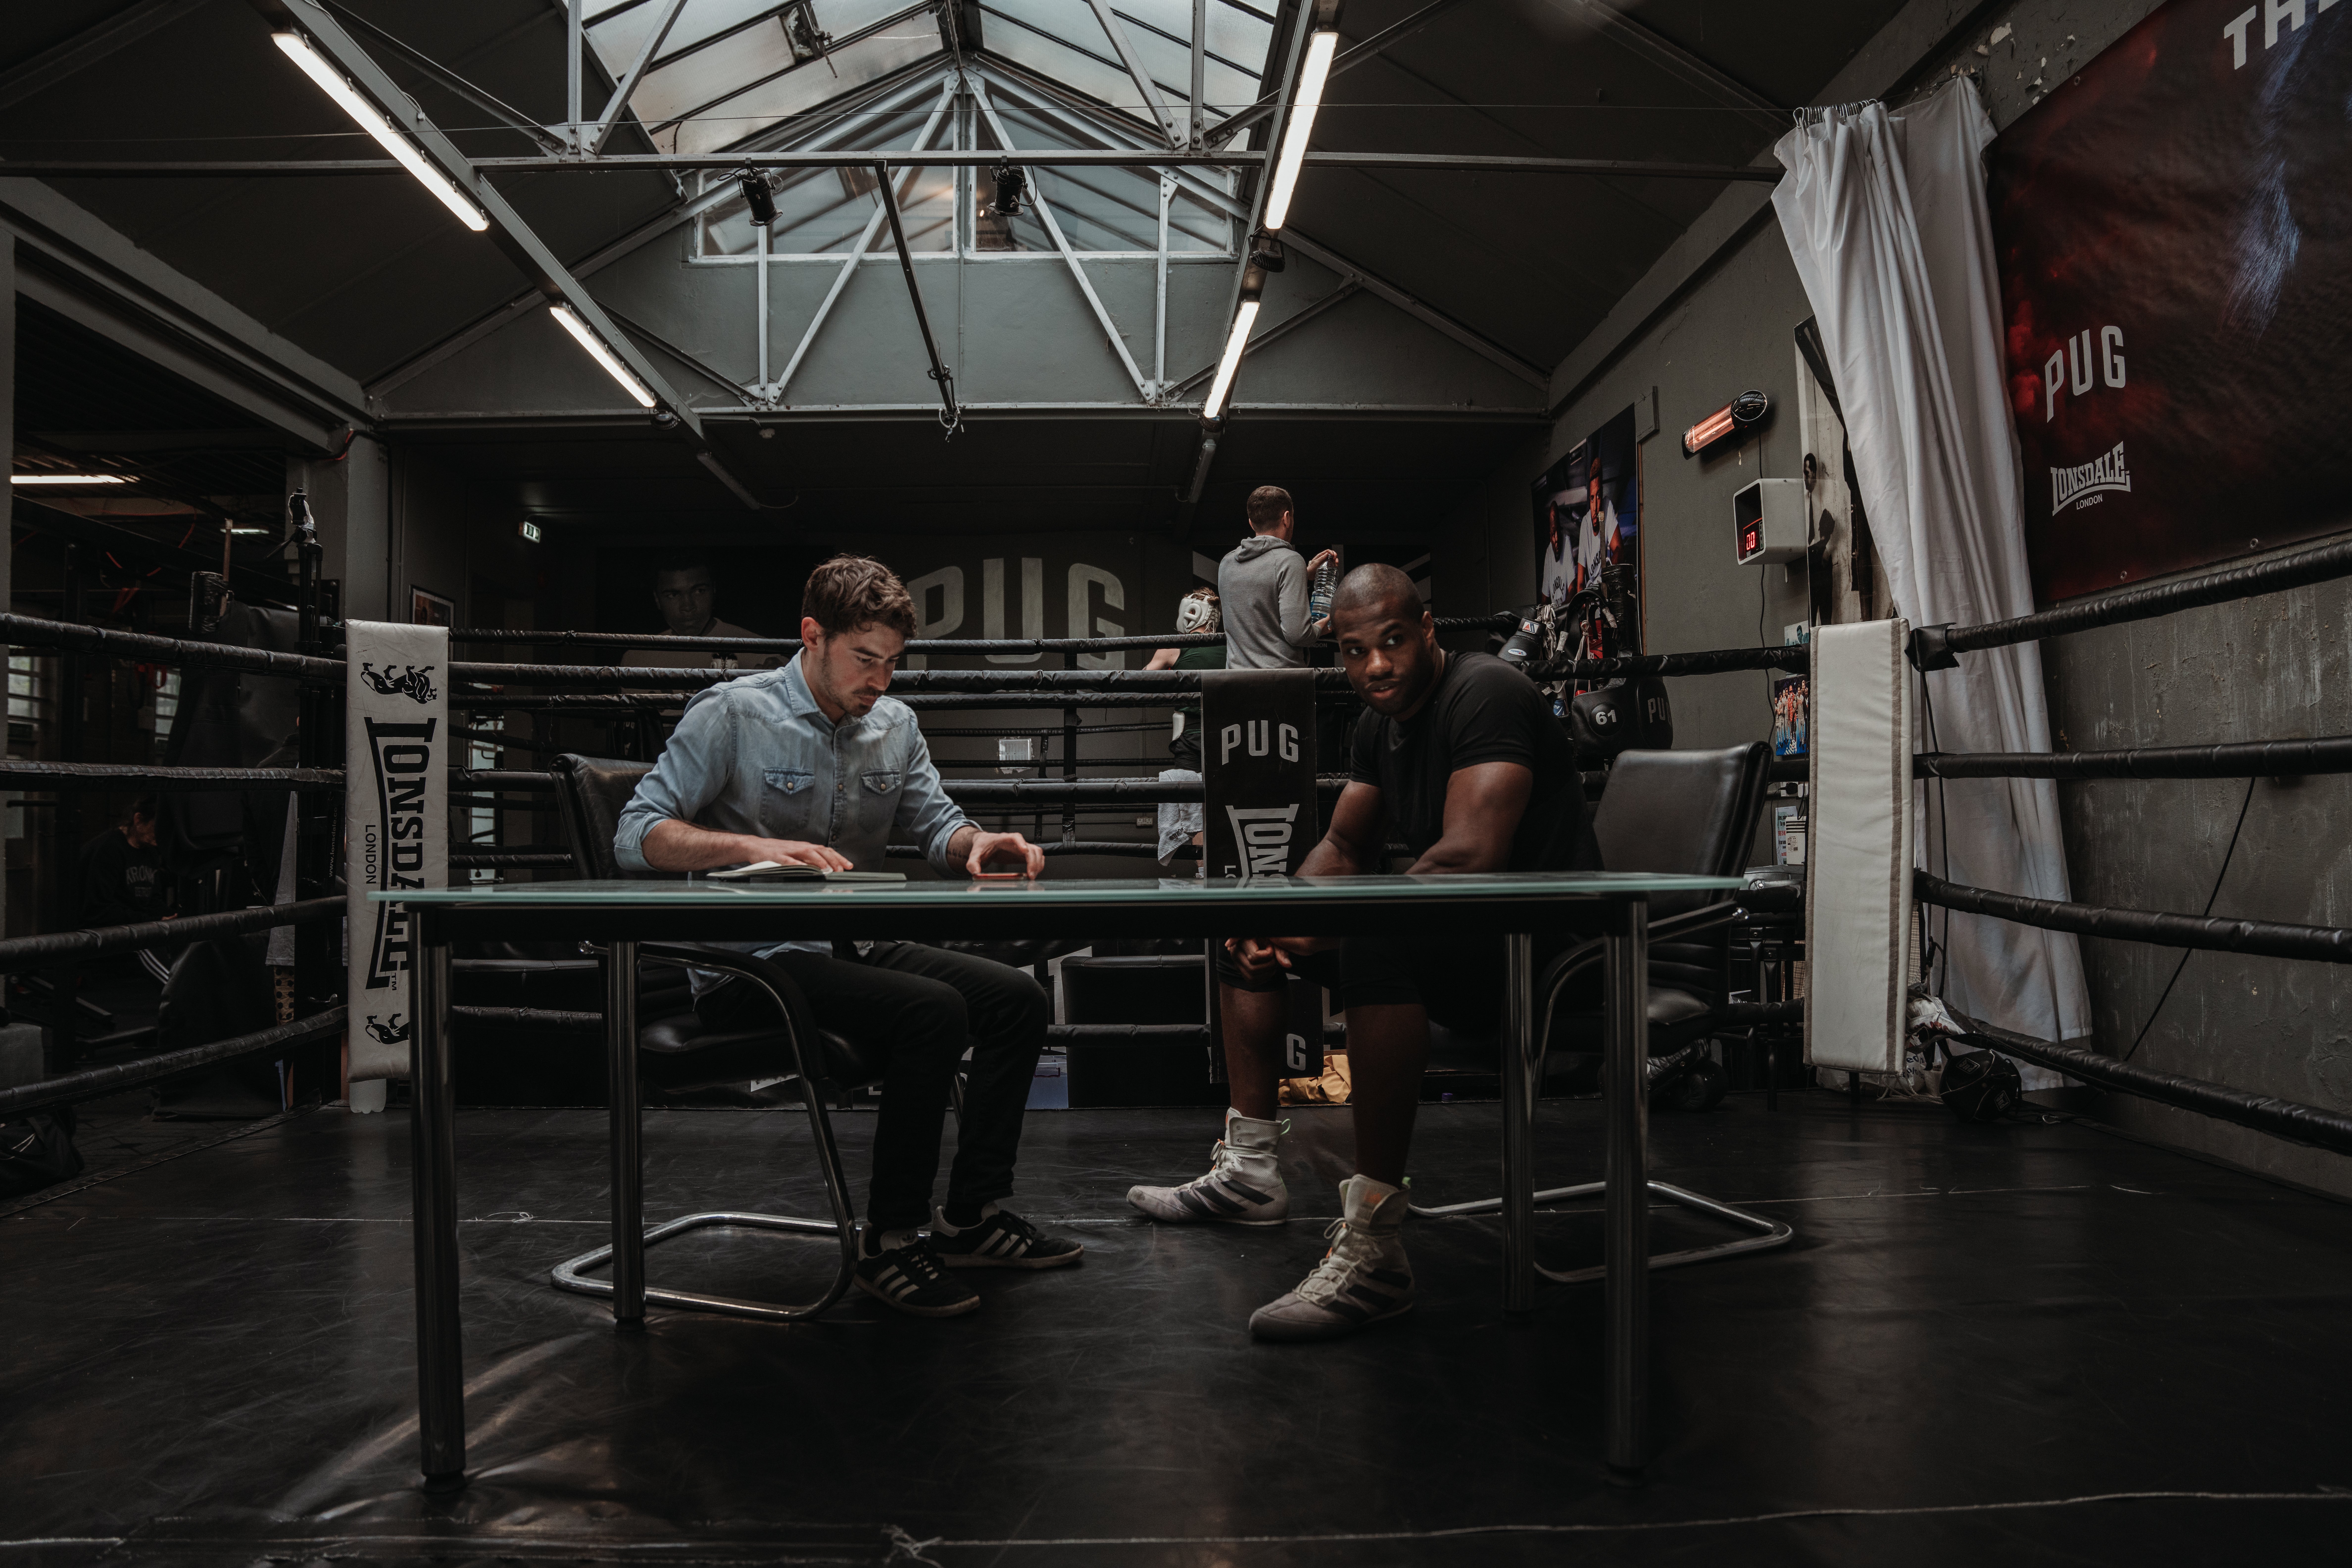 Dubois spoke to The Independent at his gym in West Finchley in May